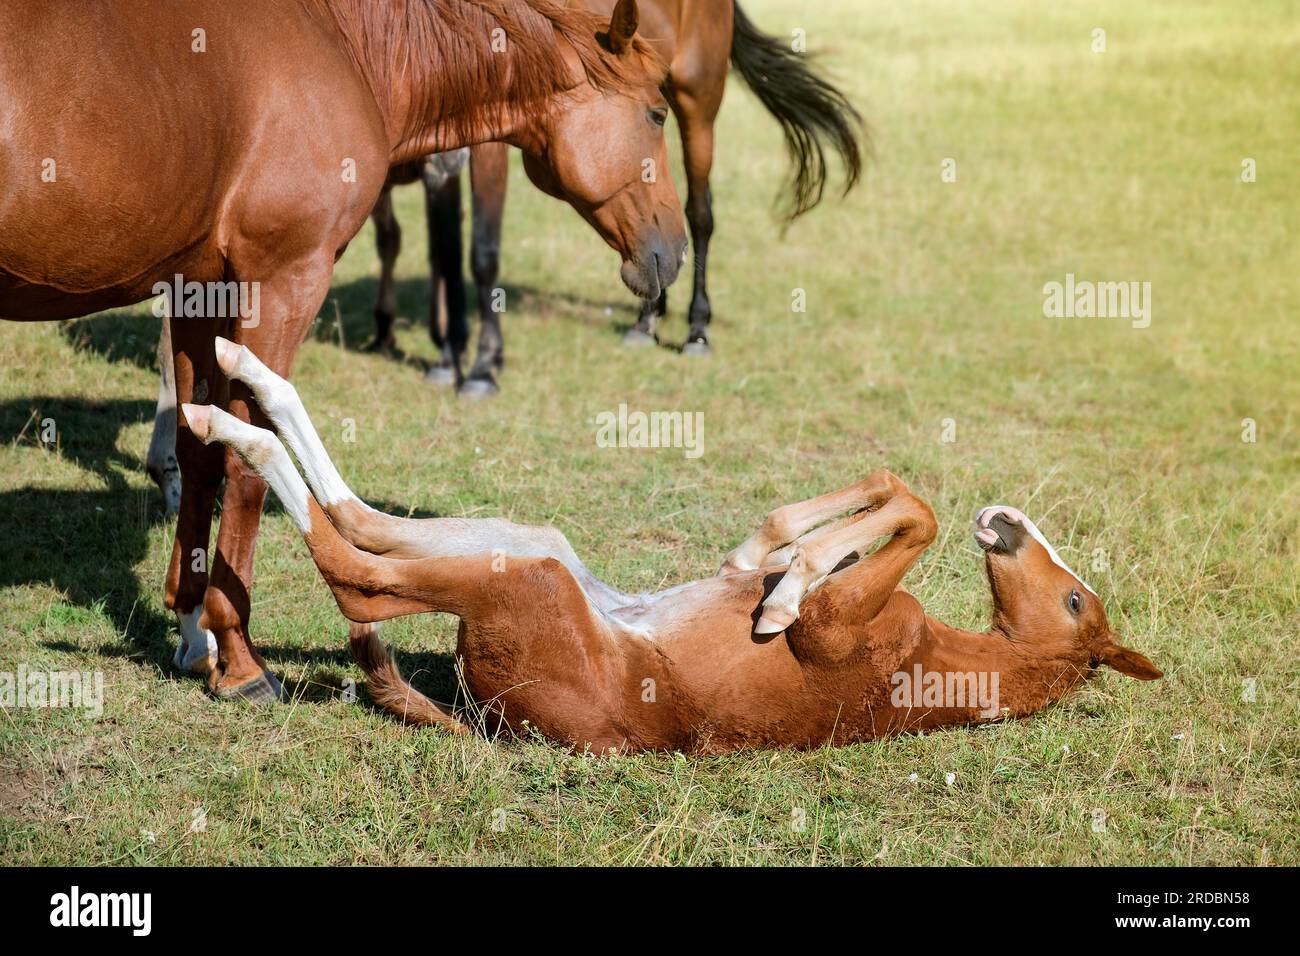 Portrait of a thoroughbred colt . Newborn horse. The beautiful foal is lying on his back in the grass. Sunny summer day. Outdoor. A thoroughbred sport Stock Photo